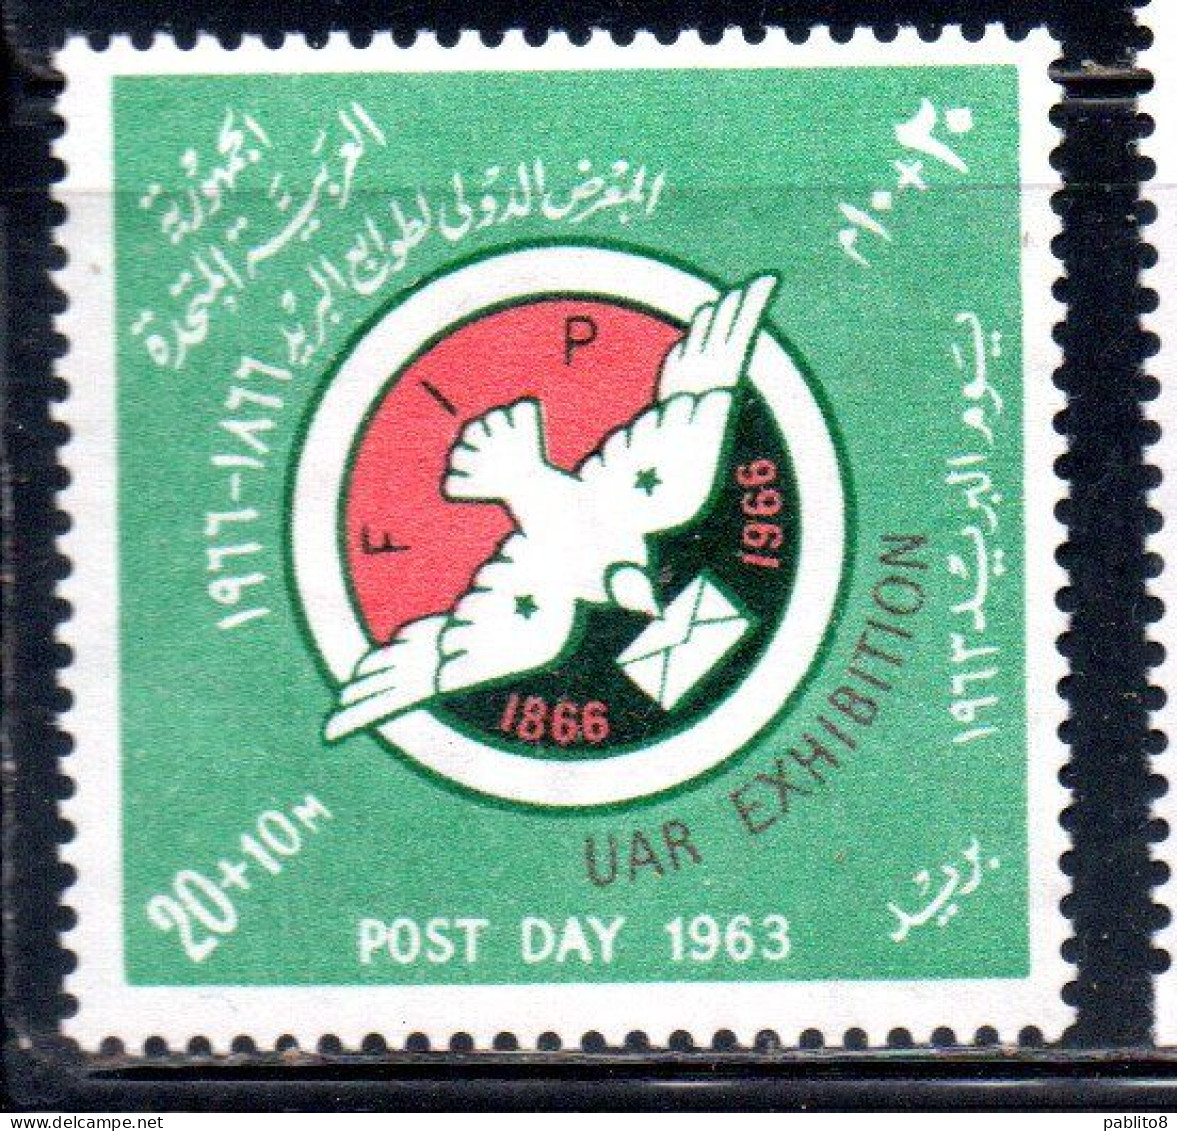 UAR EGYPT EGITTO 1963 POST DAY AND STAMP EXHIBITION 1966 OF THE FIP 20m + 10m MNH - Ongebruikt